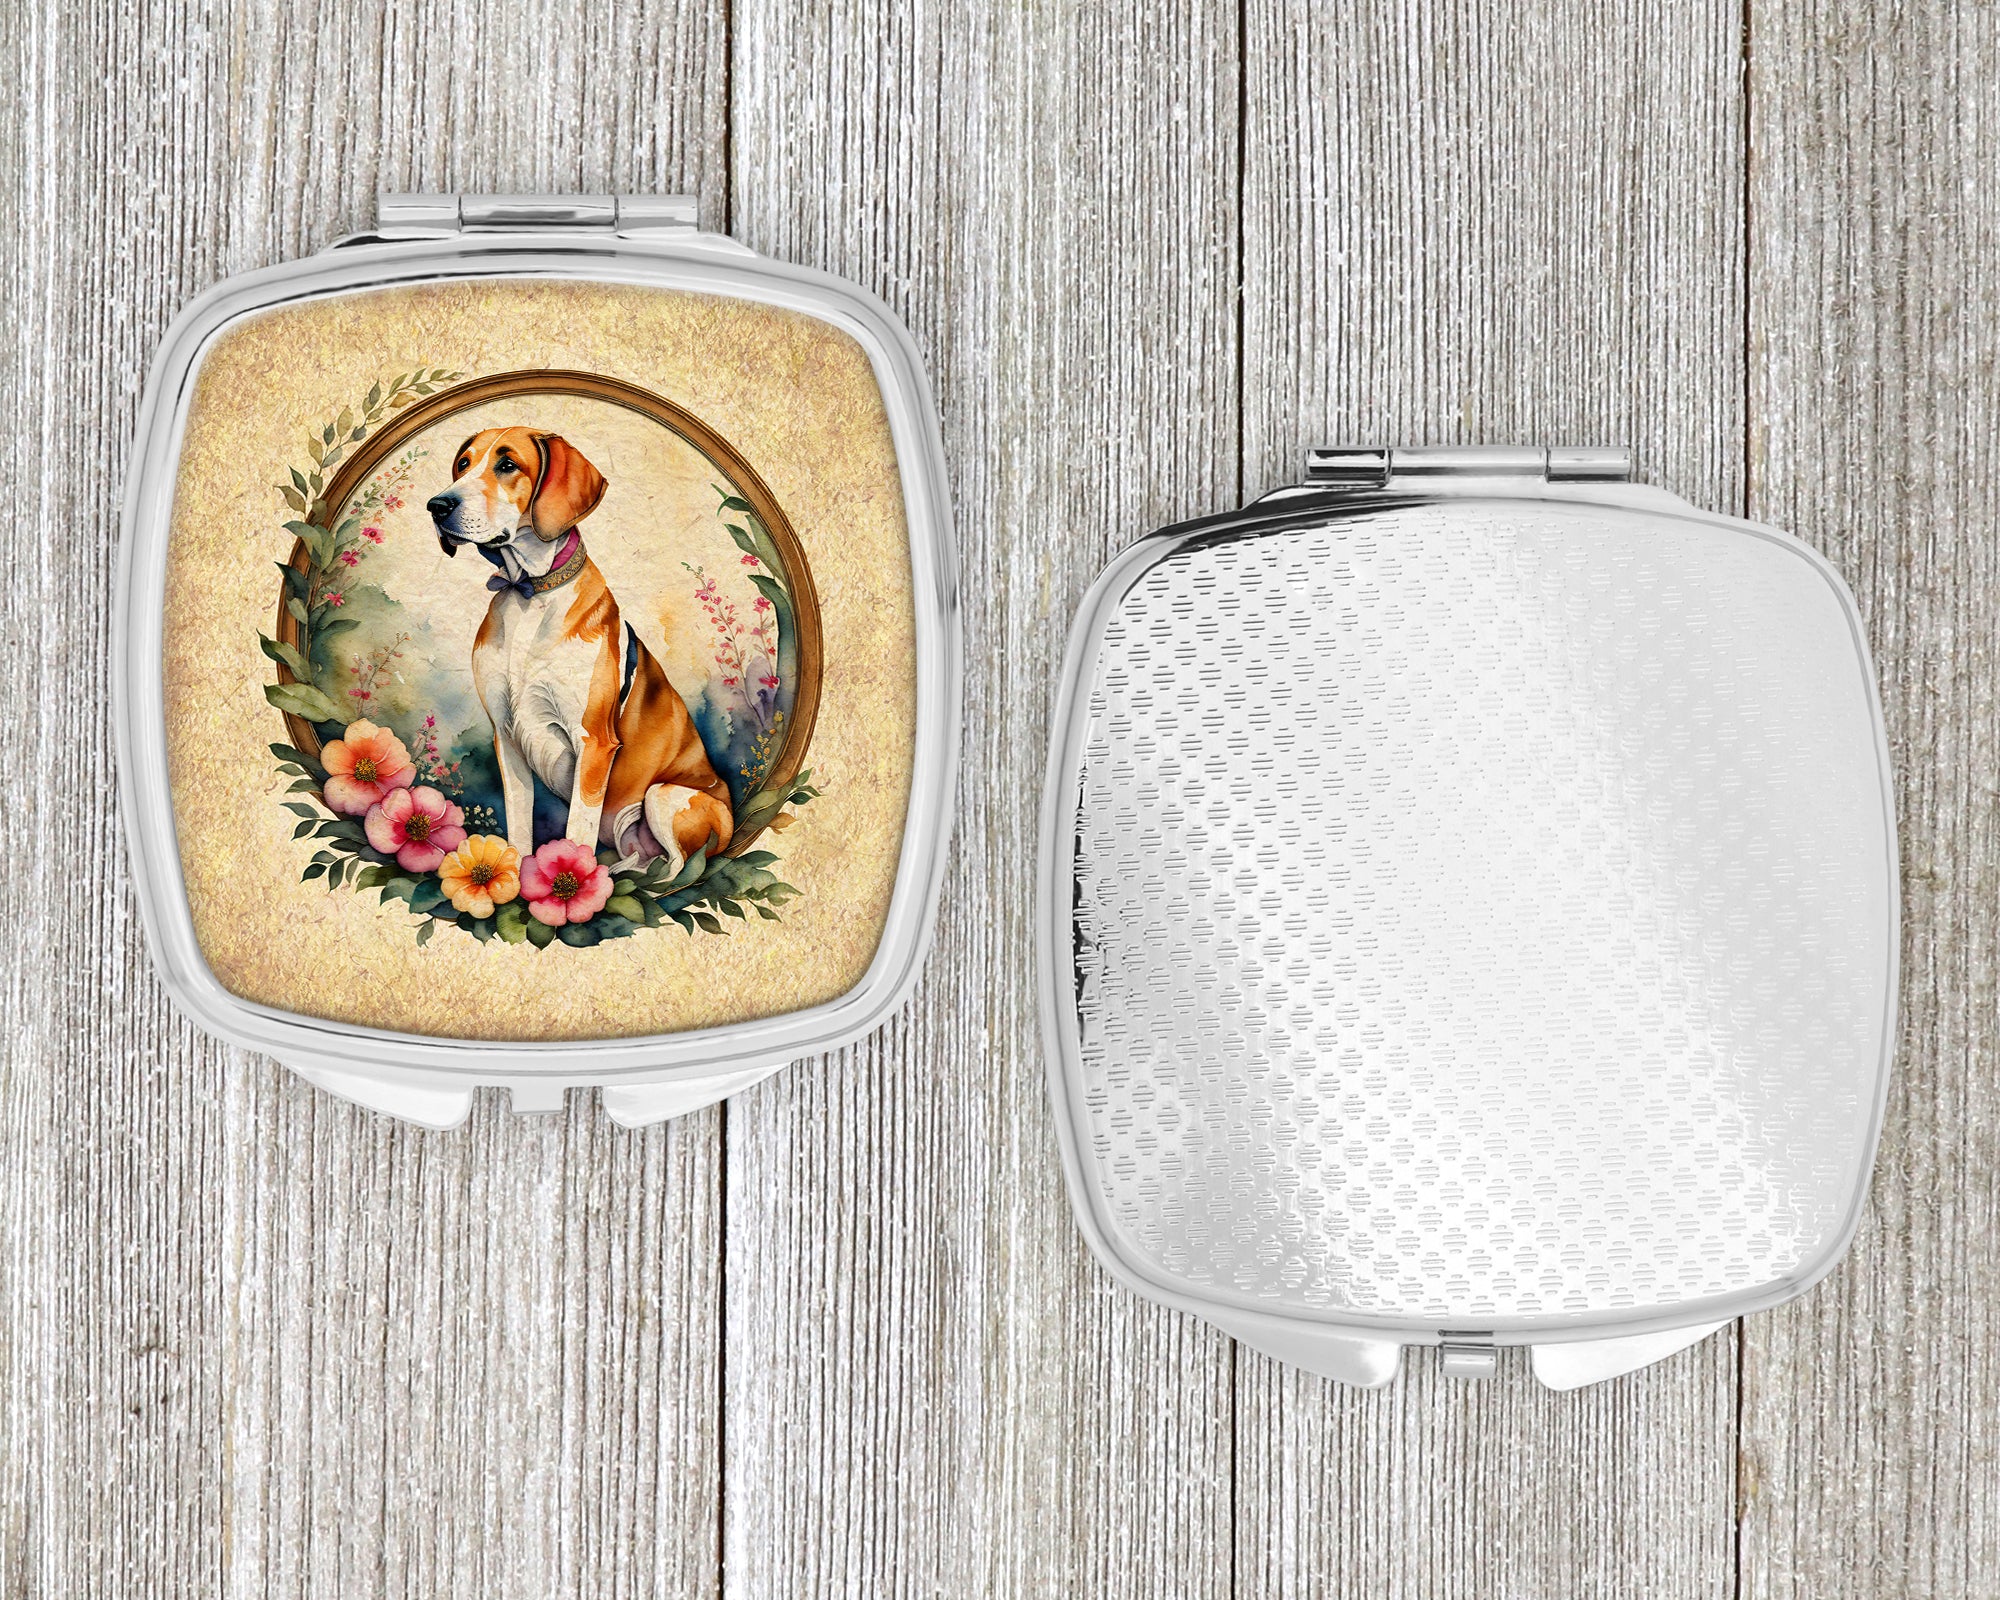 English Foxhound and Flowers Compact Mirror